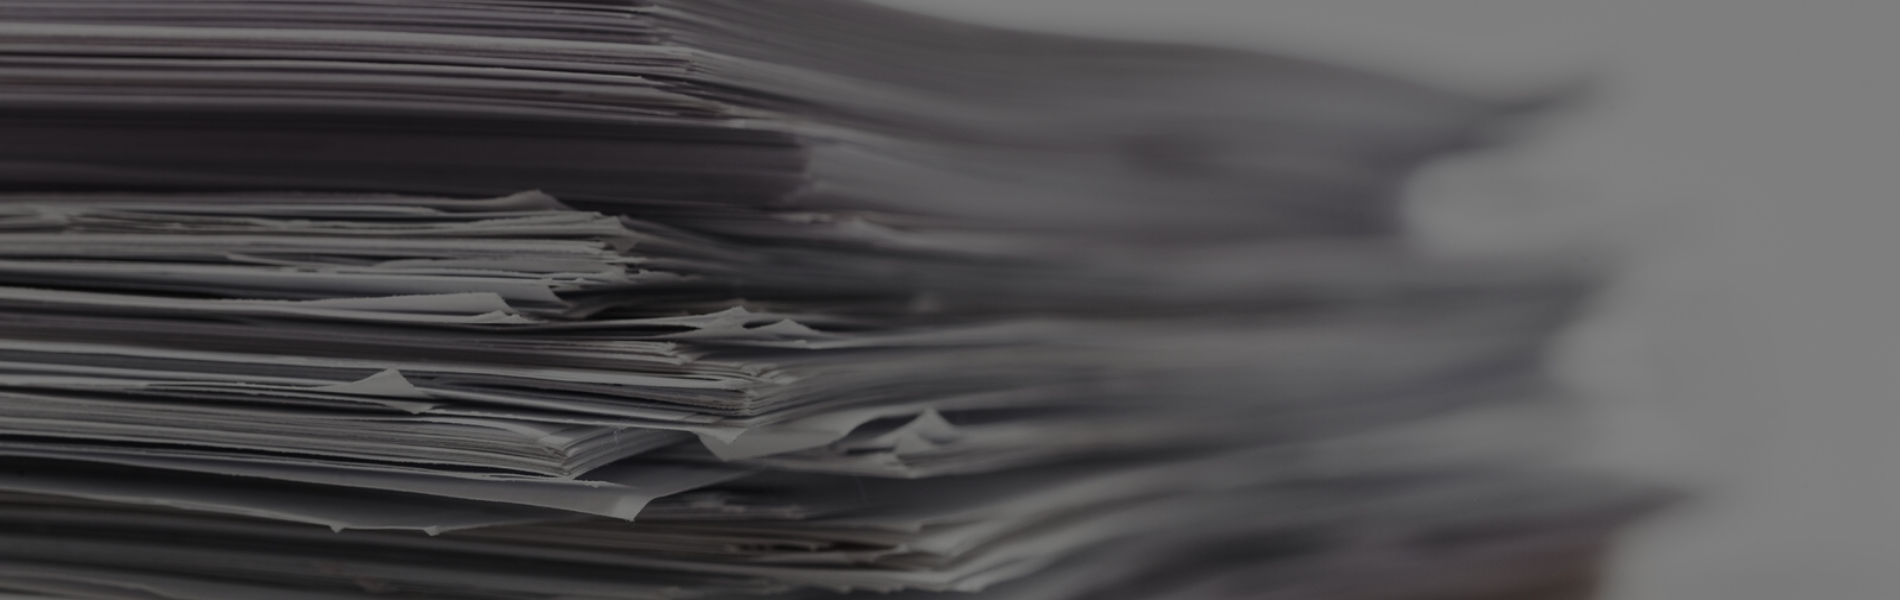 Close up photo of a stack of papers